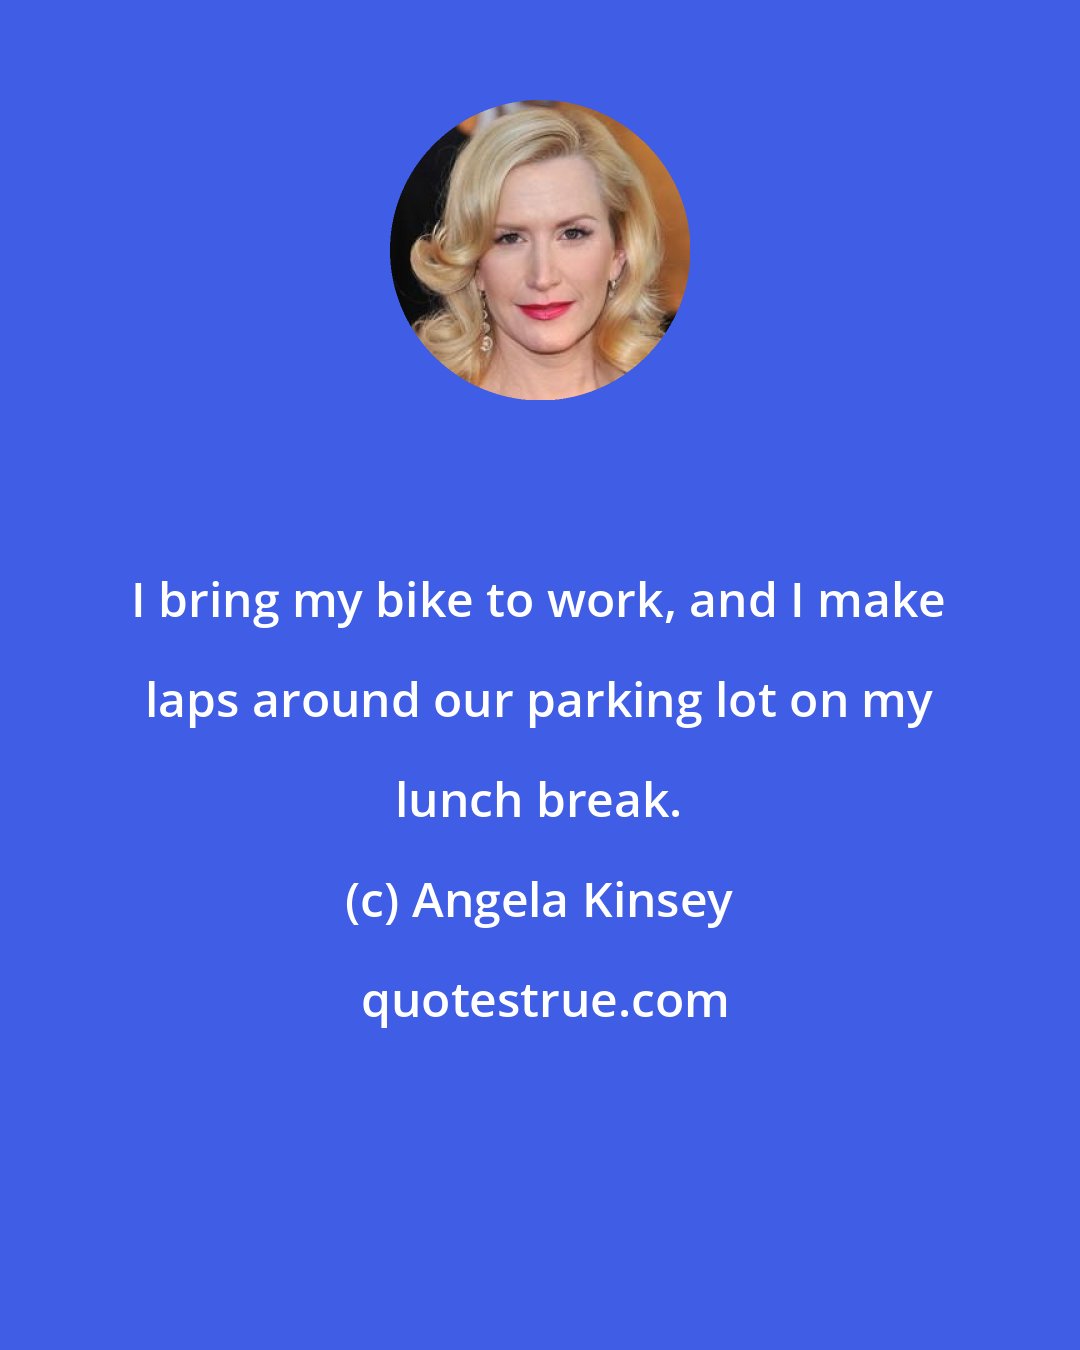 Angela Kinsey: I bring my bike to work, and I make laps around our parking lot on my lunch break.